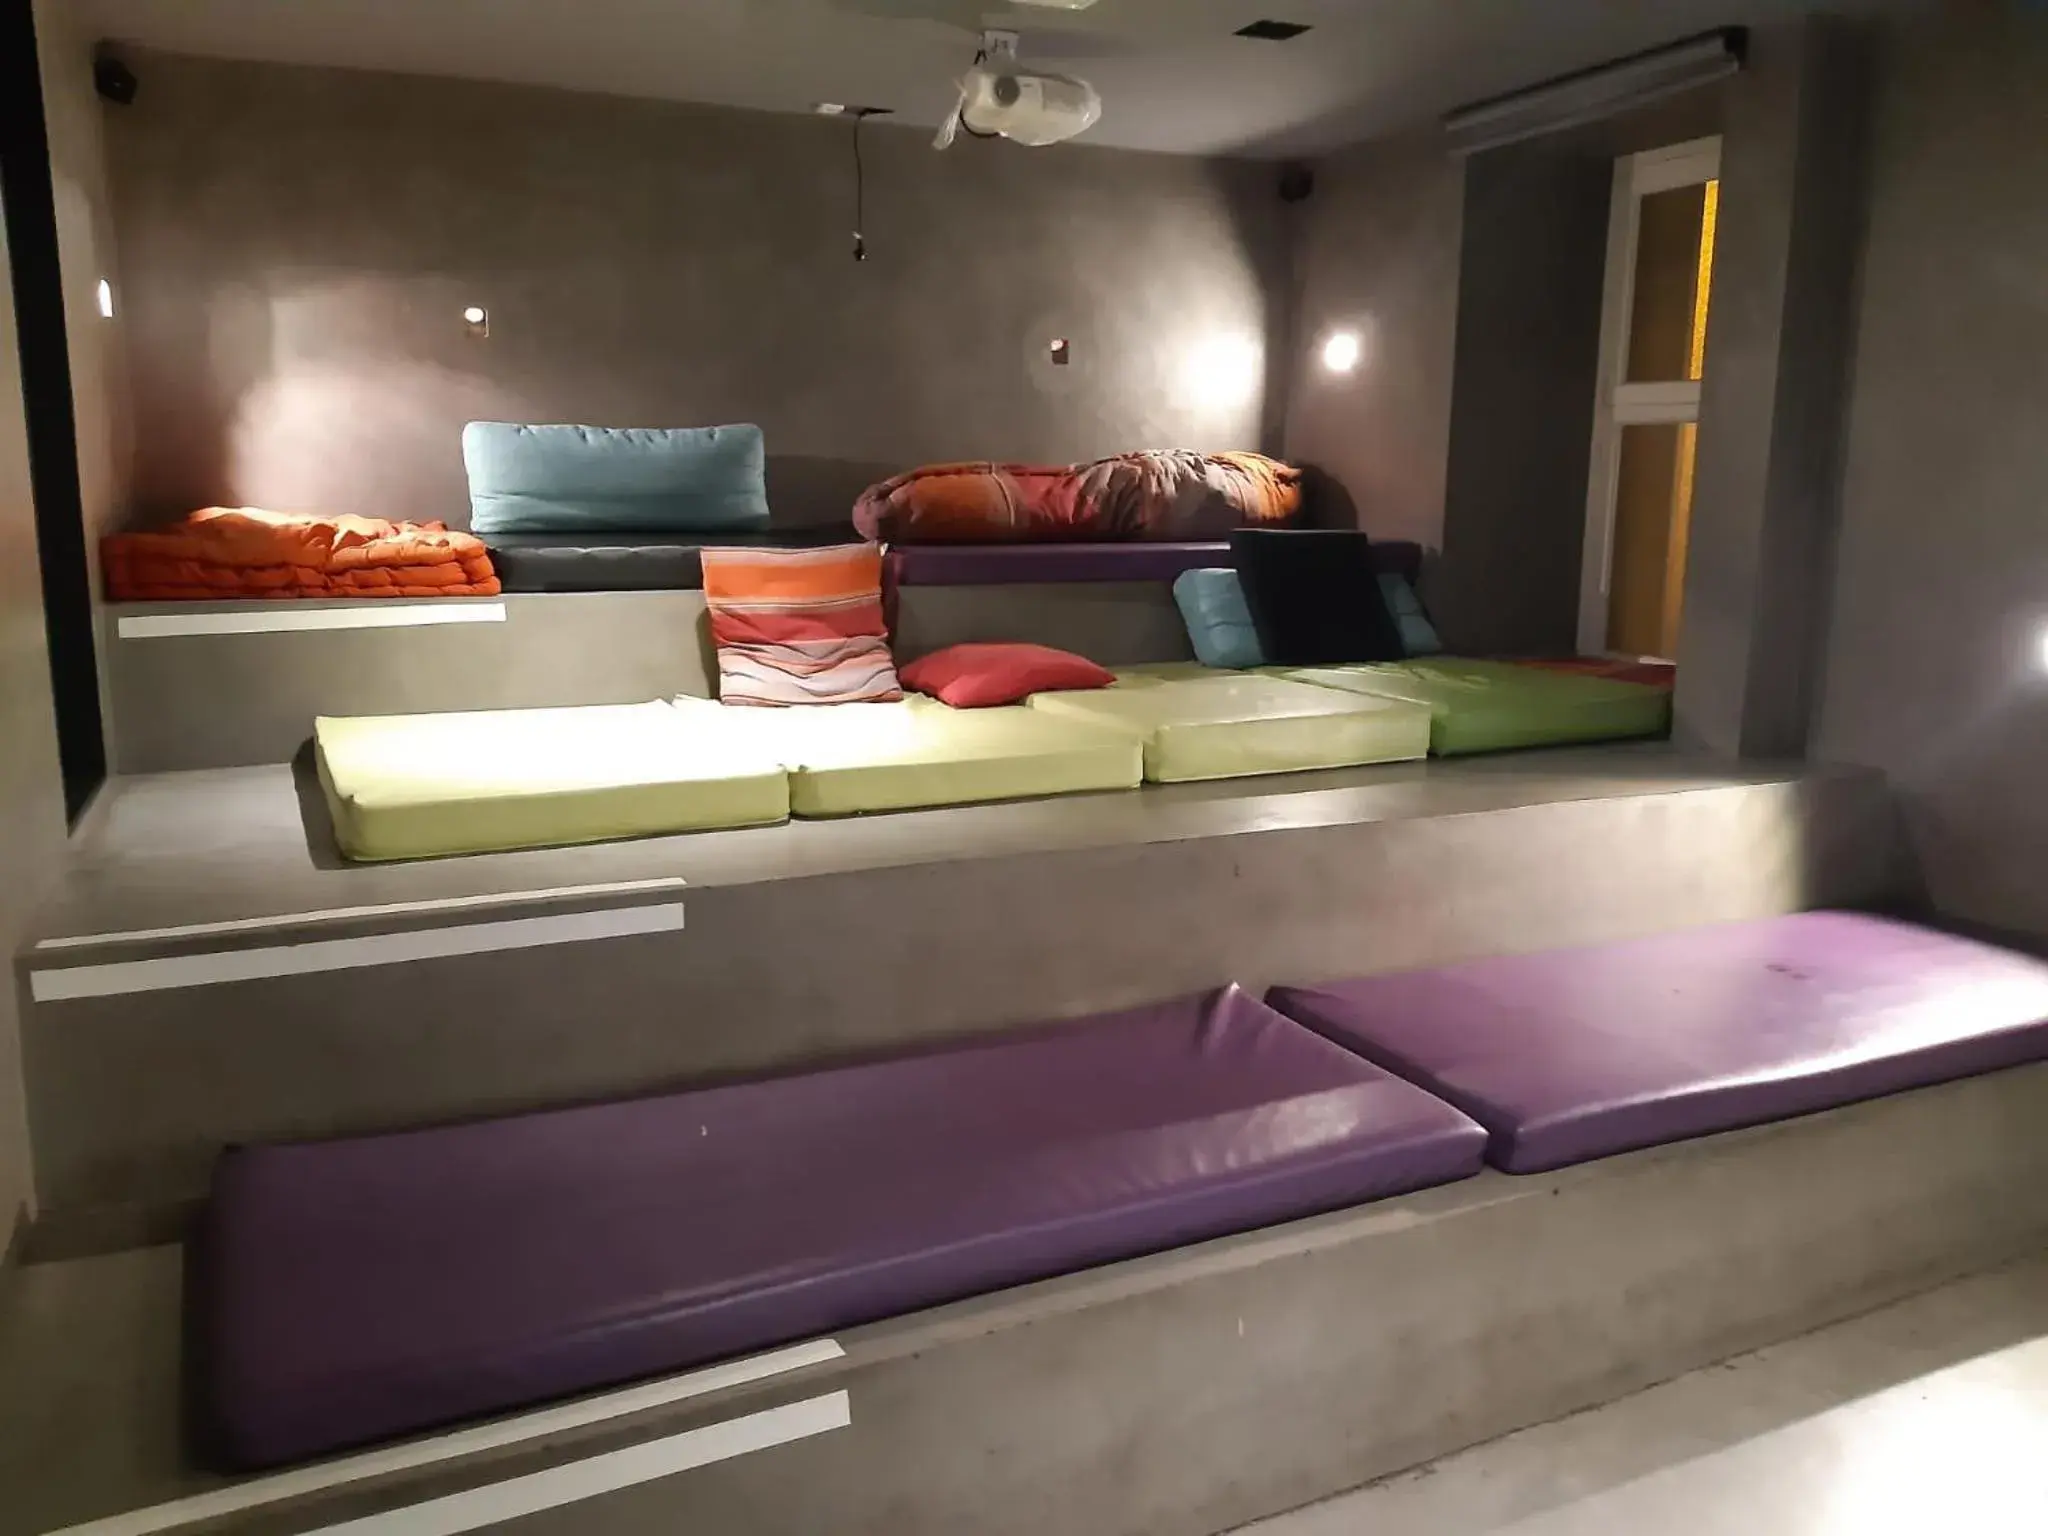 Area and facilities in Safestay Madrid